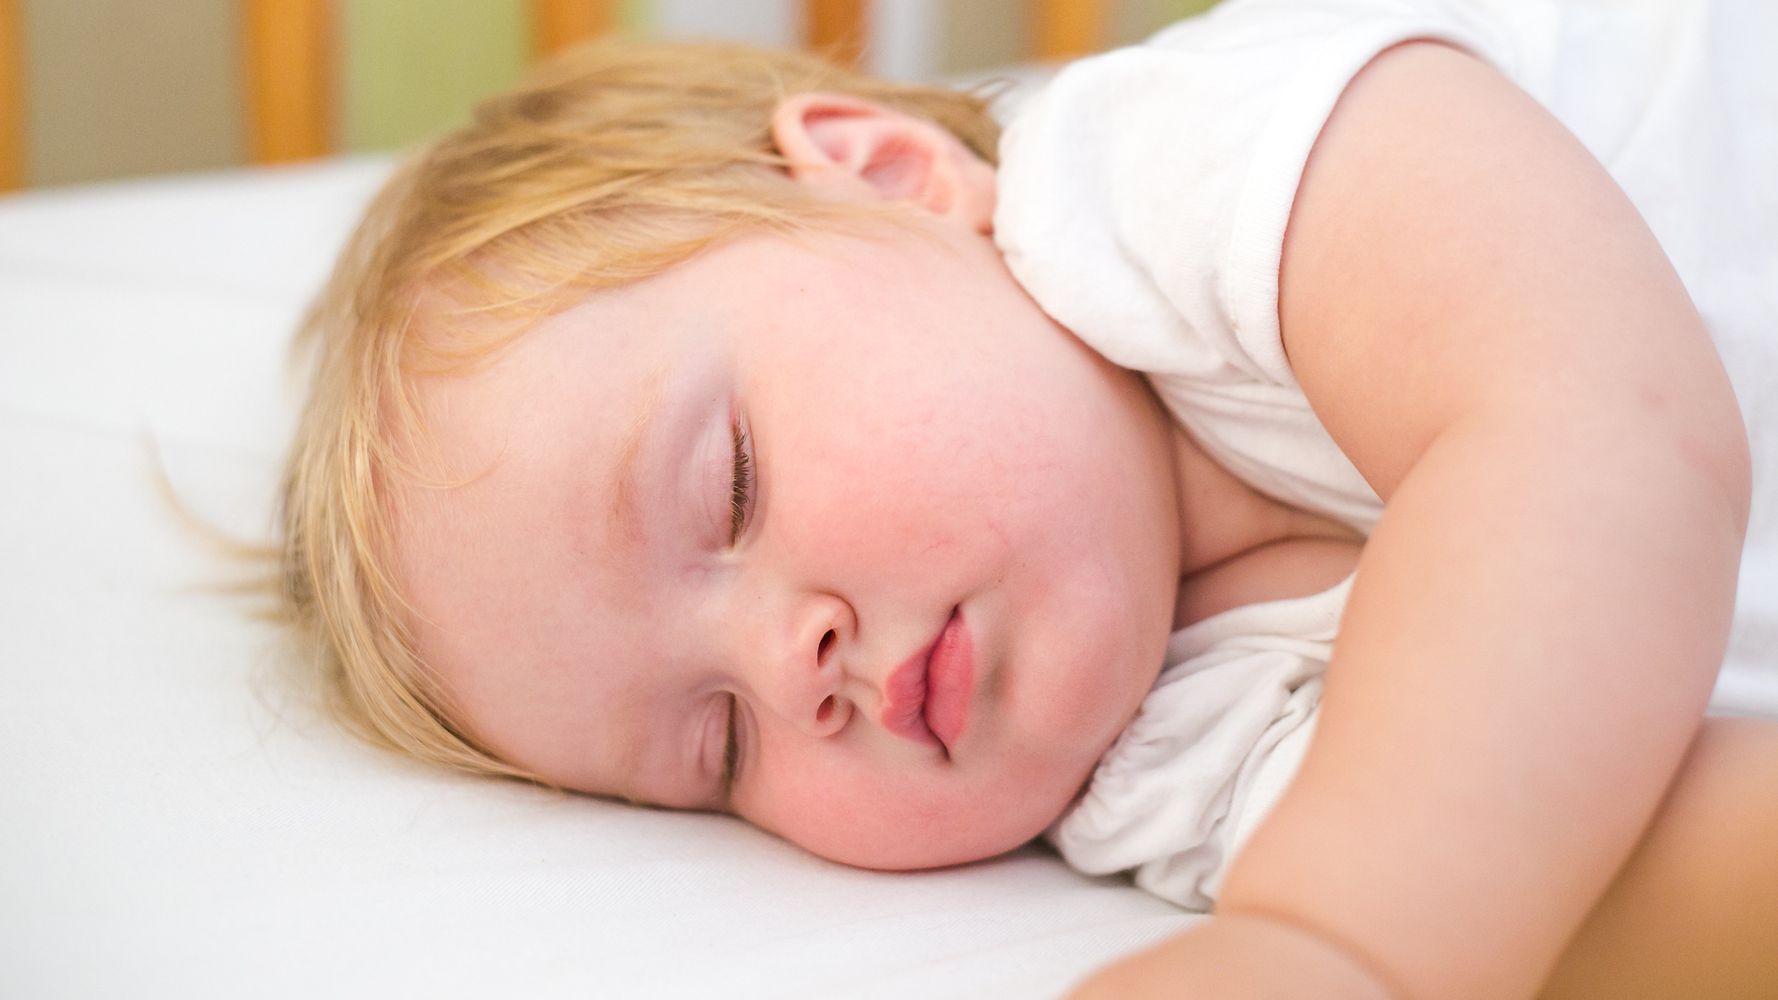 SIDs Risk: Cot Deaths At Record Low But Parents Can Take Steps To ...